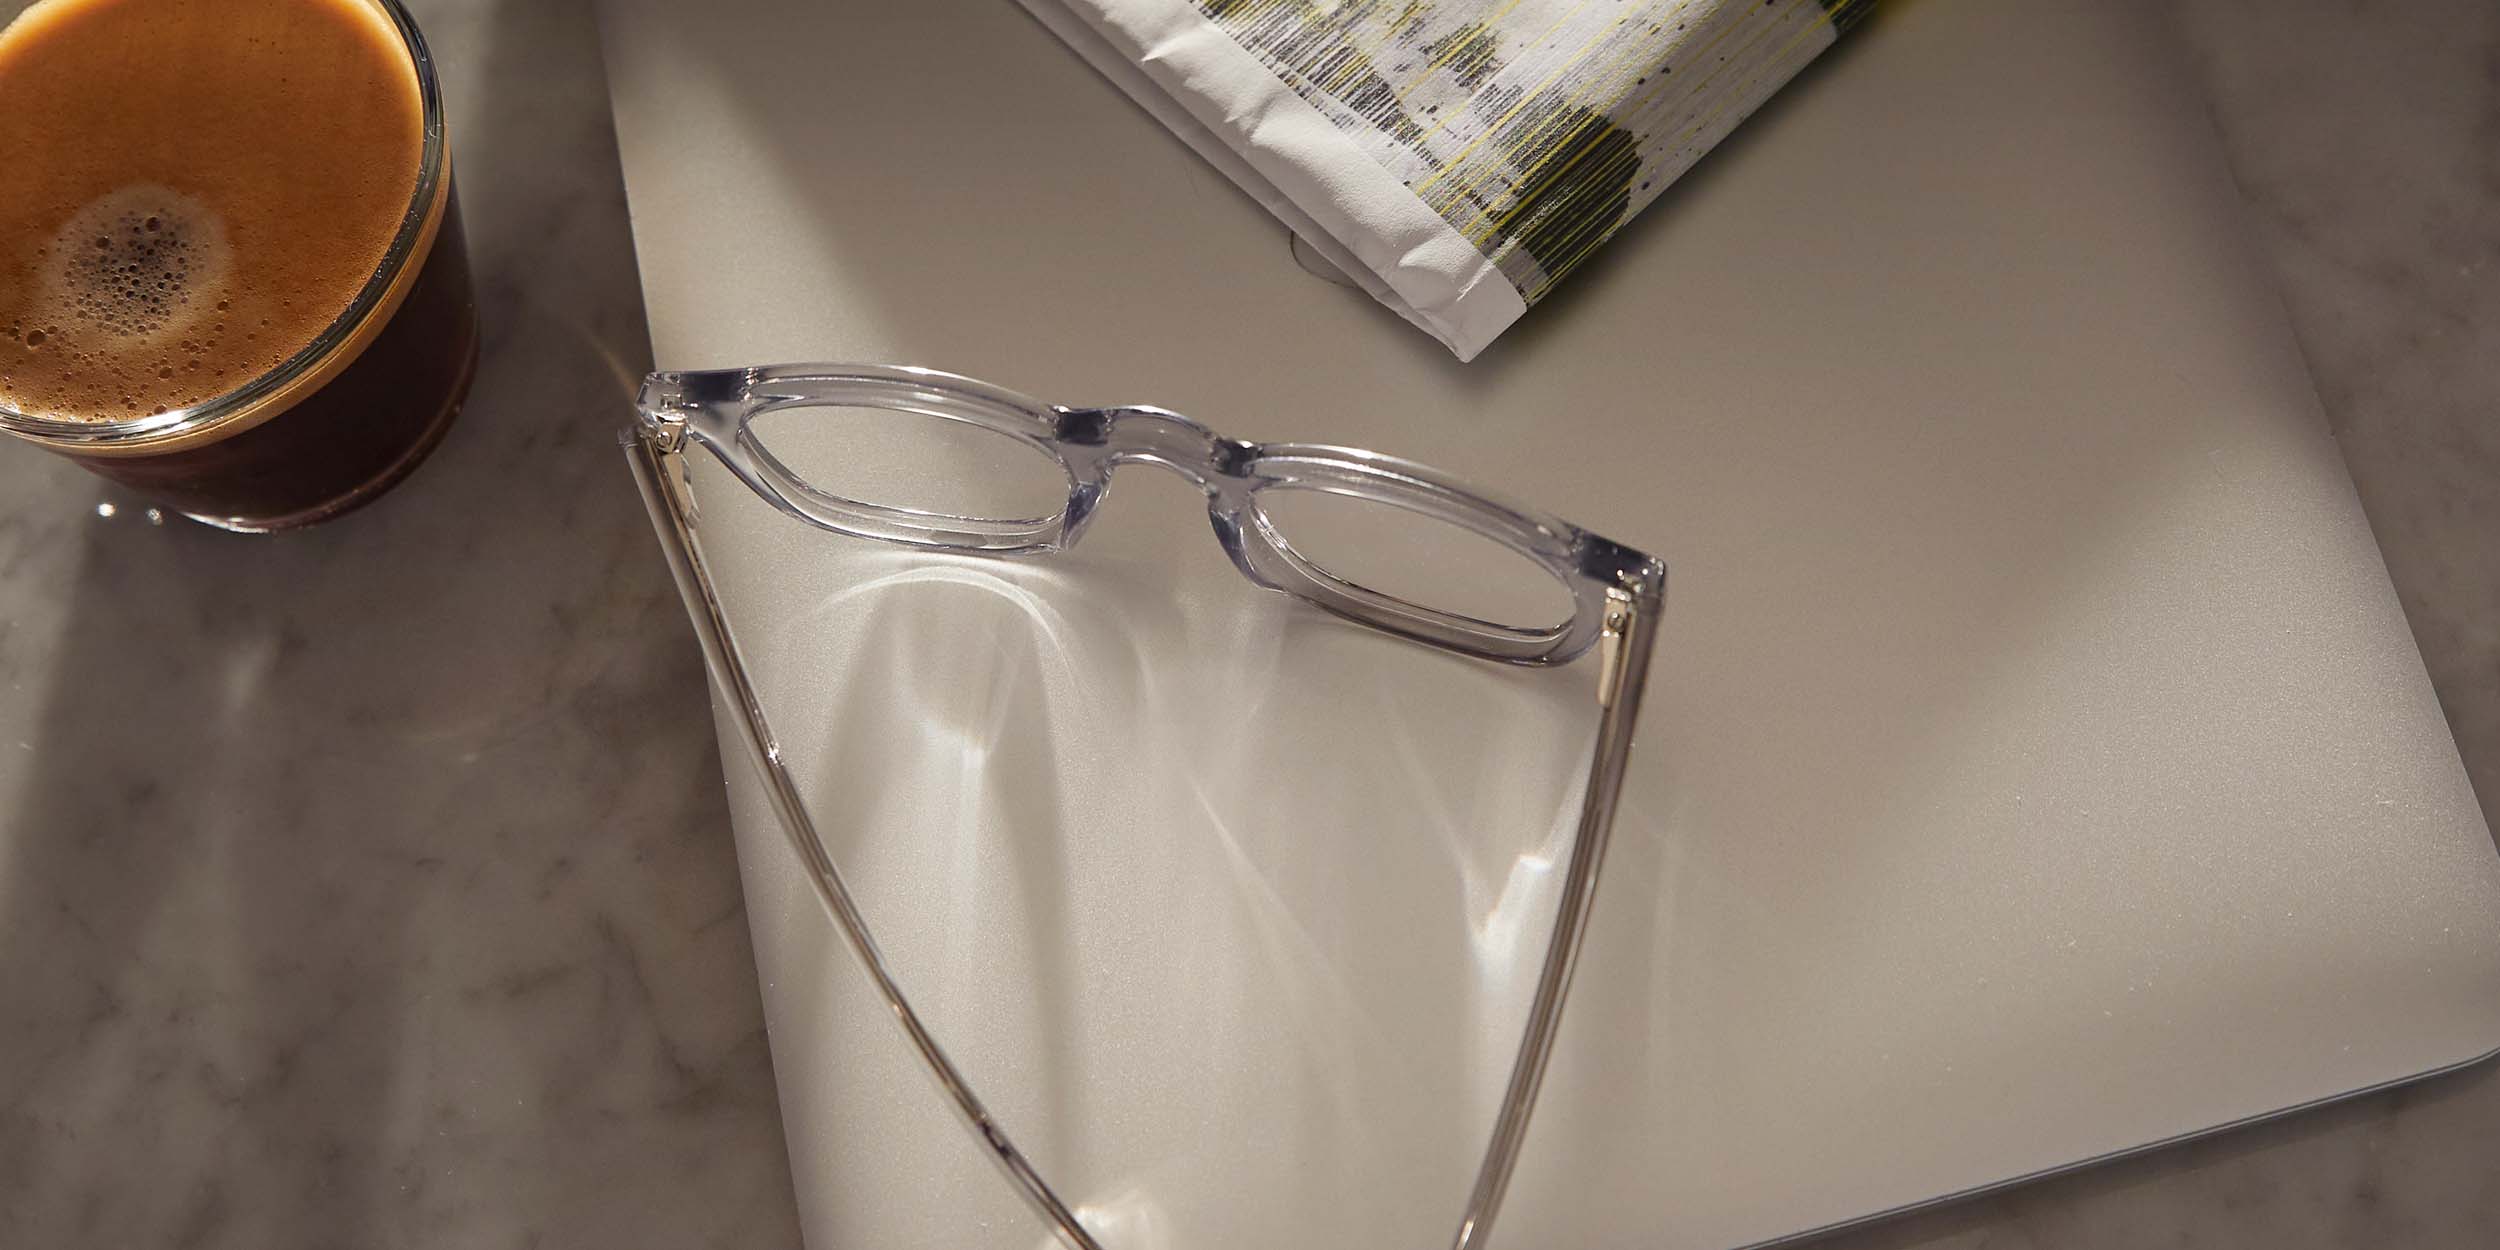 Photo Details of Thomas Black Reading Glasses in a room